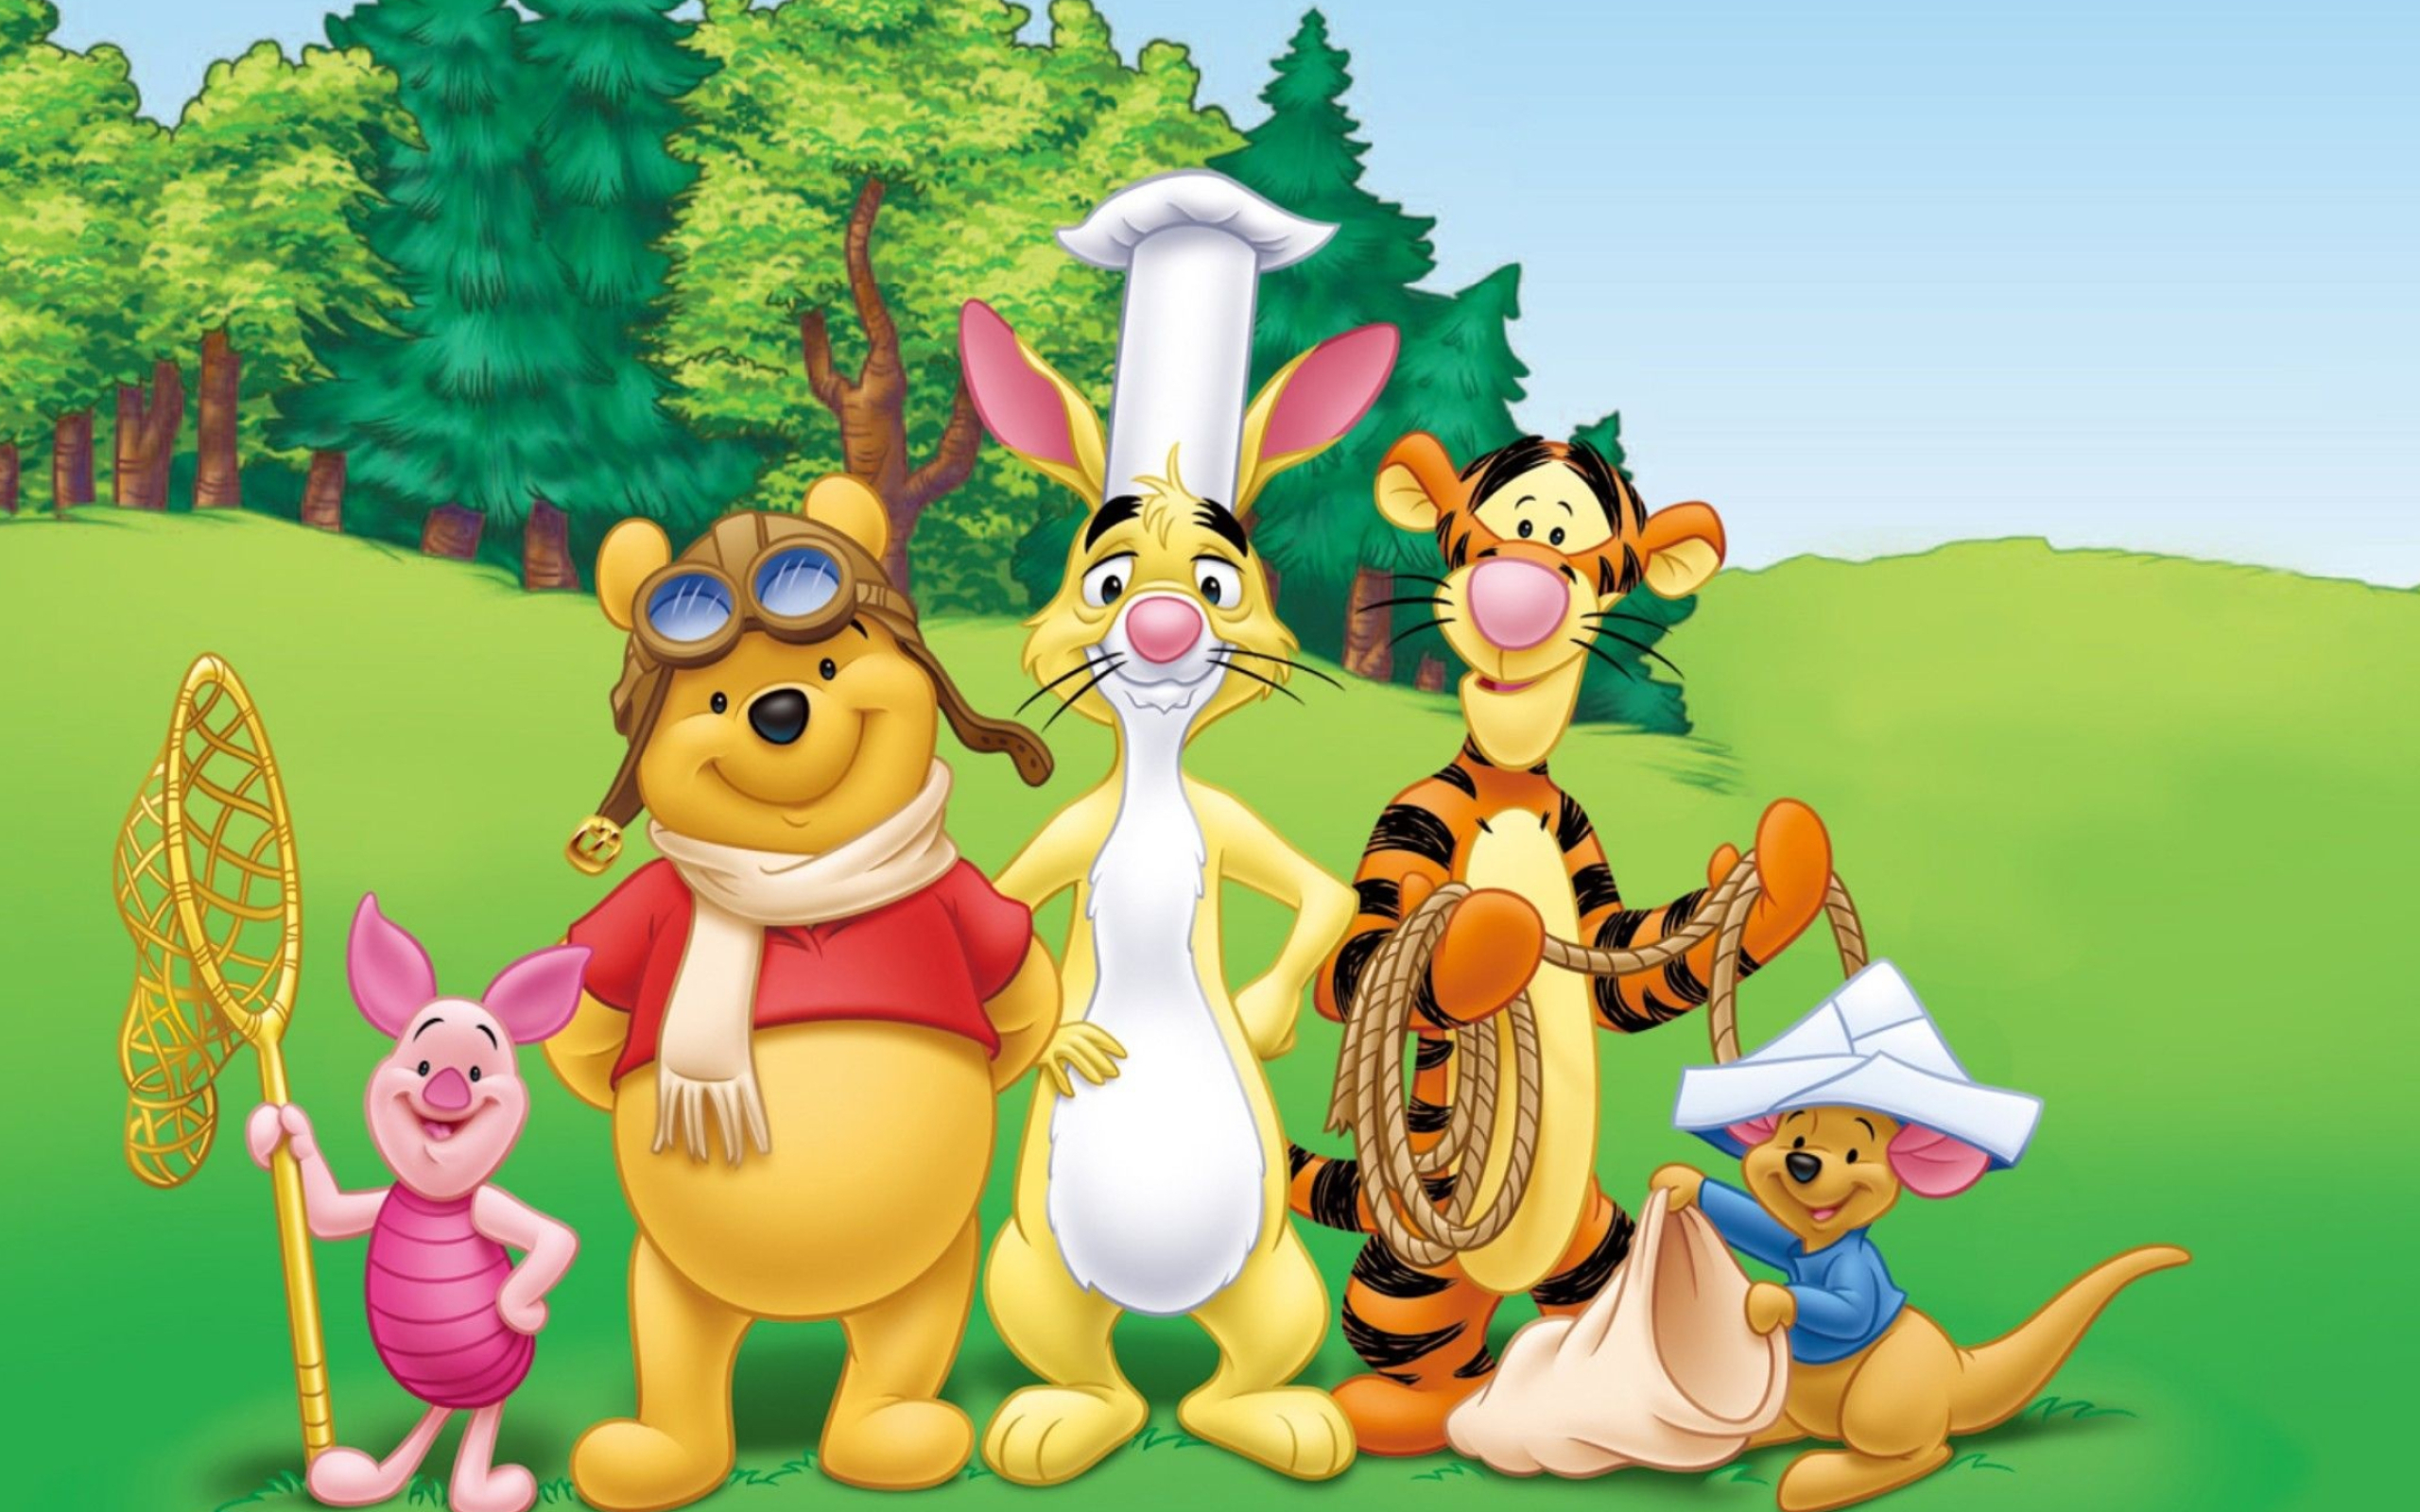 Tigger, Winnie-the-Pooh animation, Winnie the Pooh character wallpapers, None specified, 2560x1600 HD Desktop